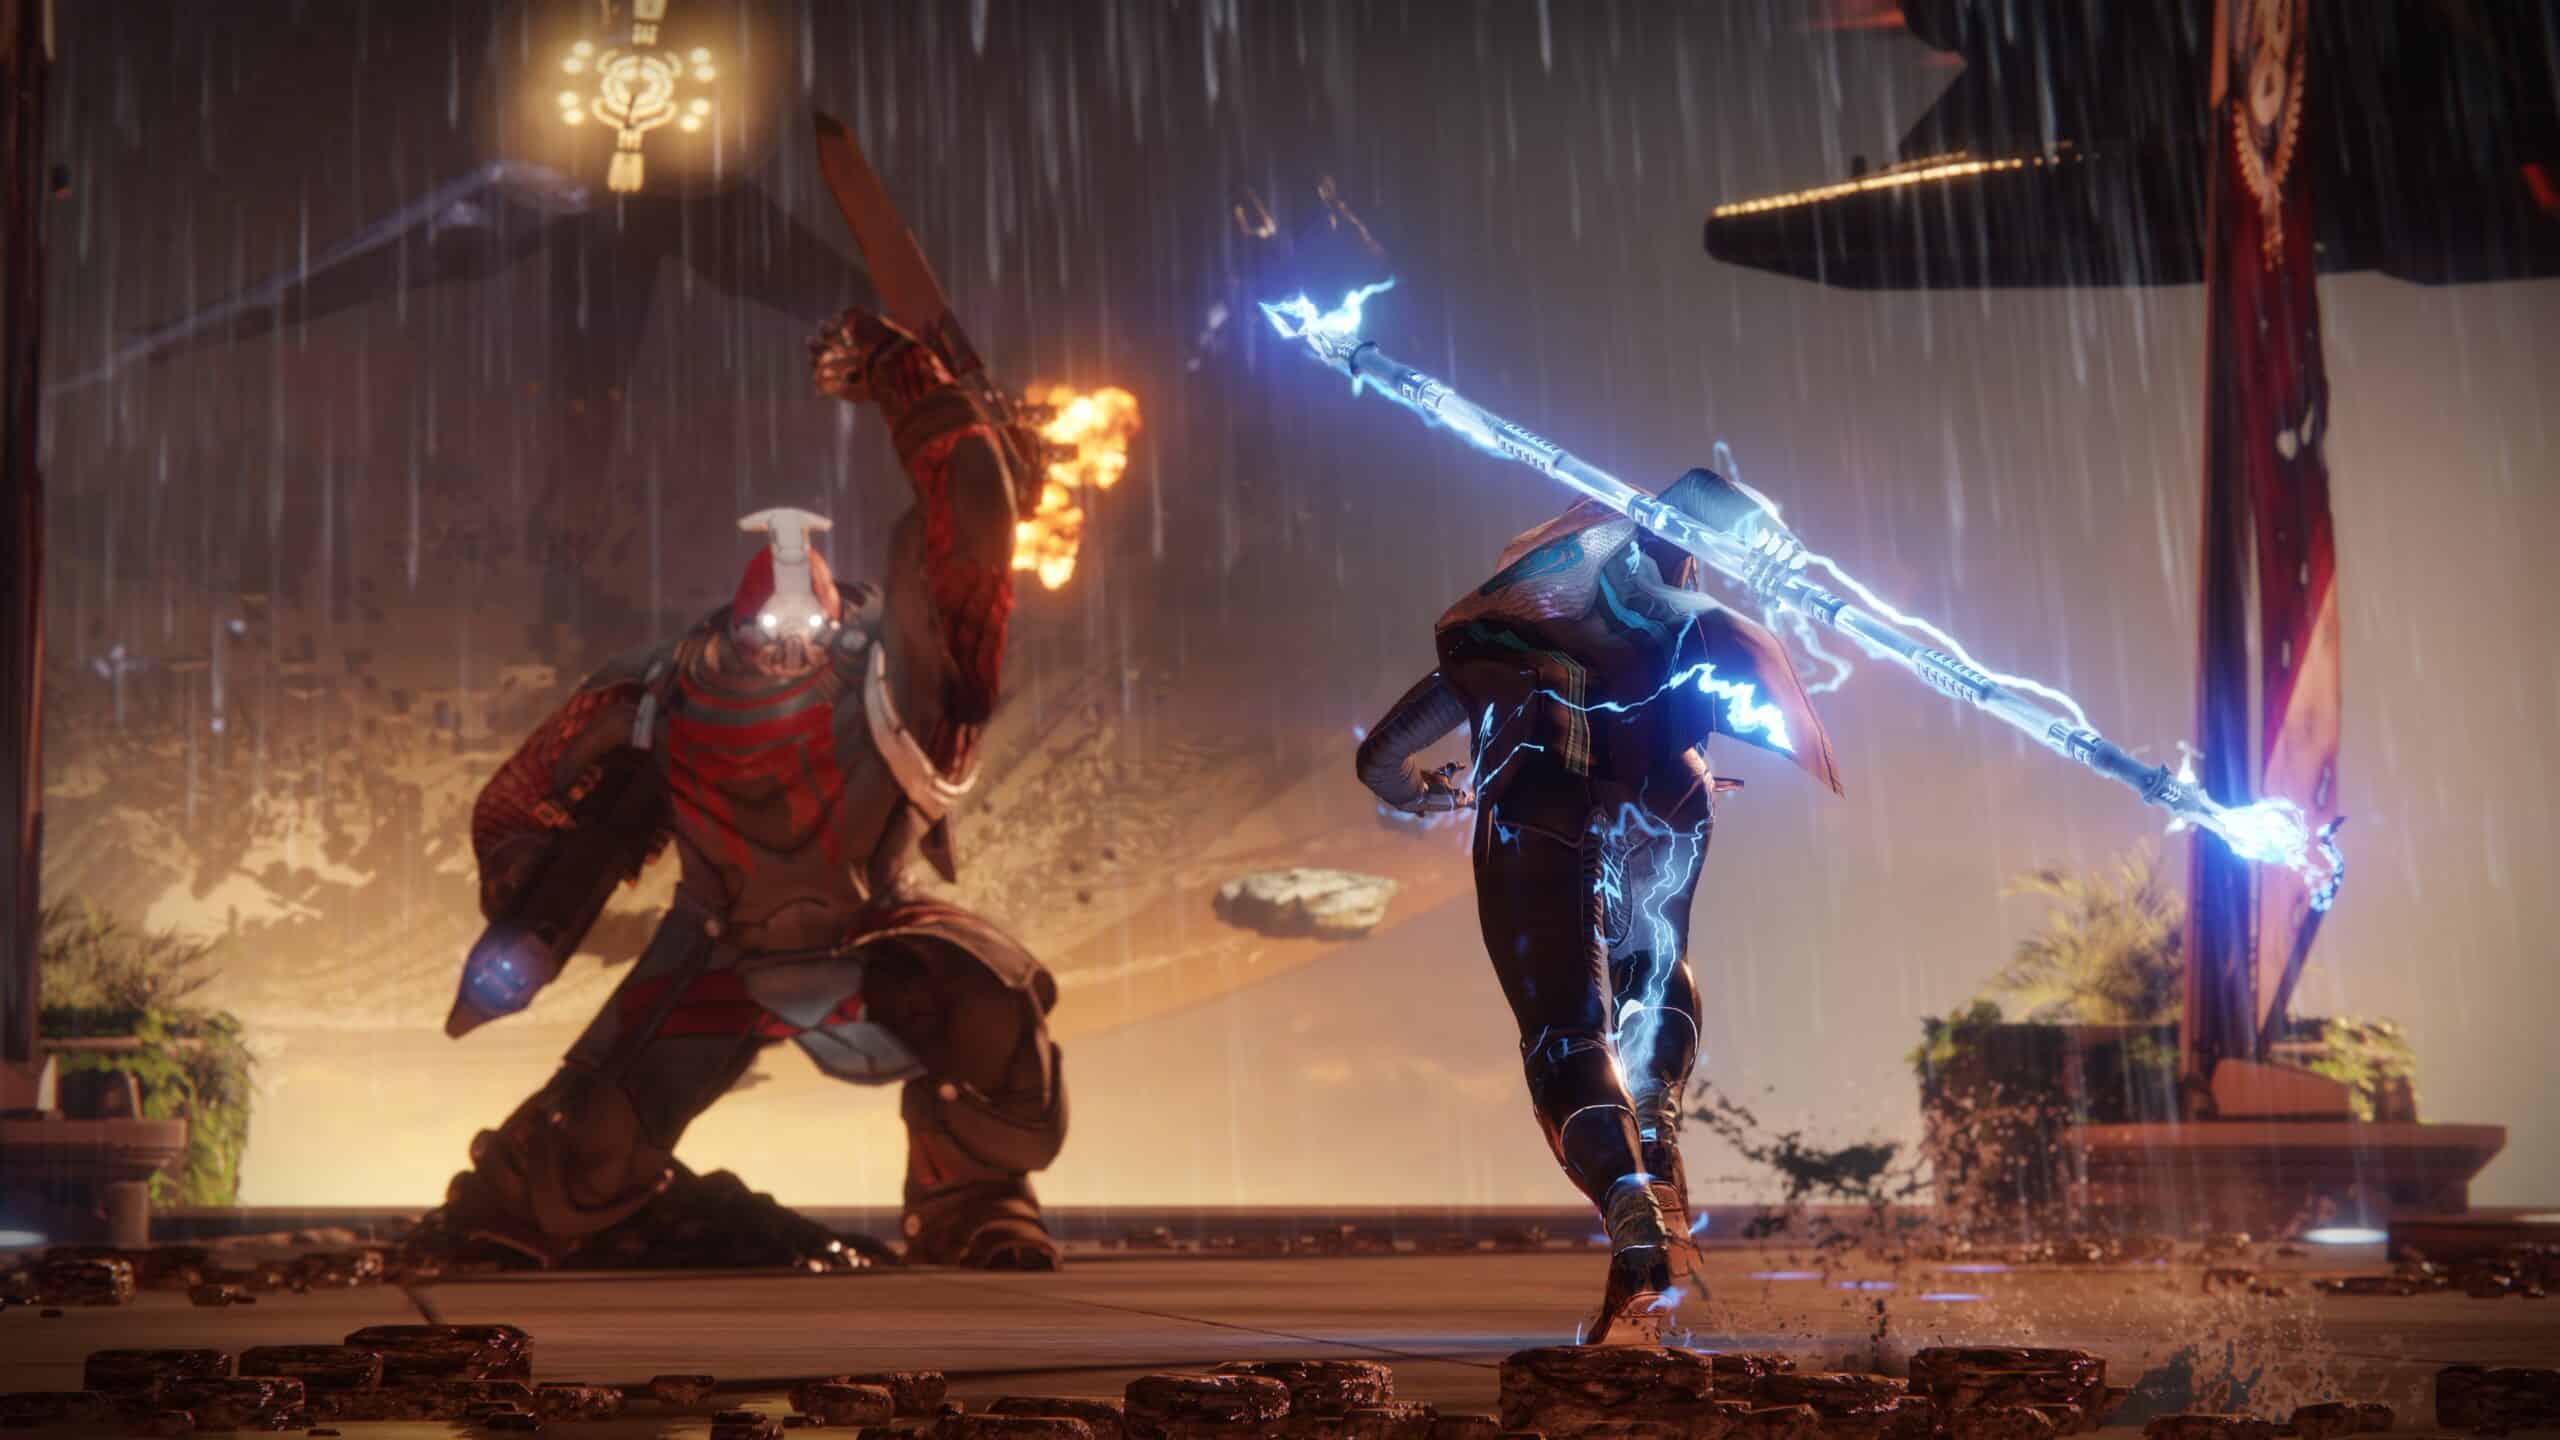 depicting Guardians in action, showcasing the thrilling gameplay and immersive world of Destiny 2.